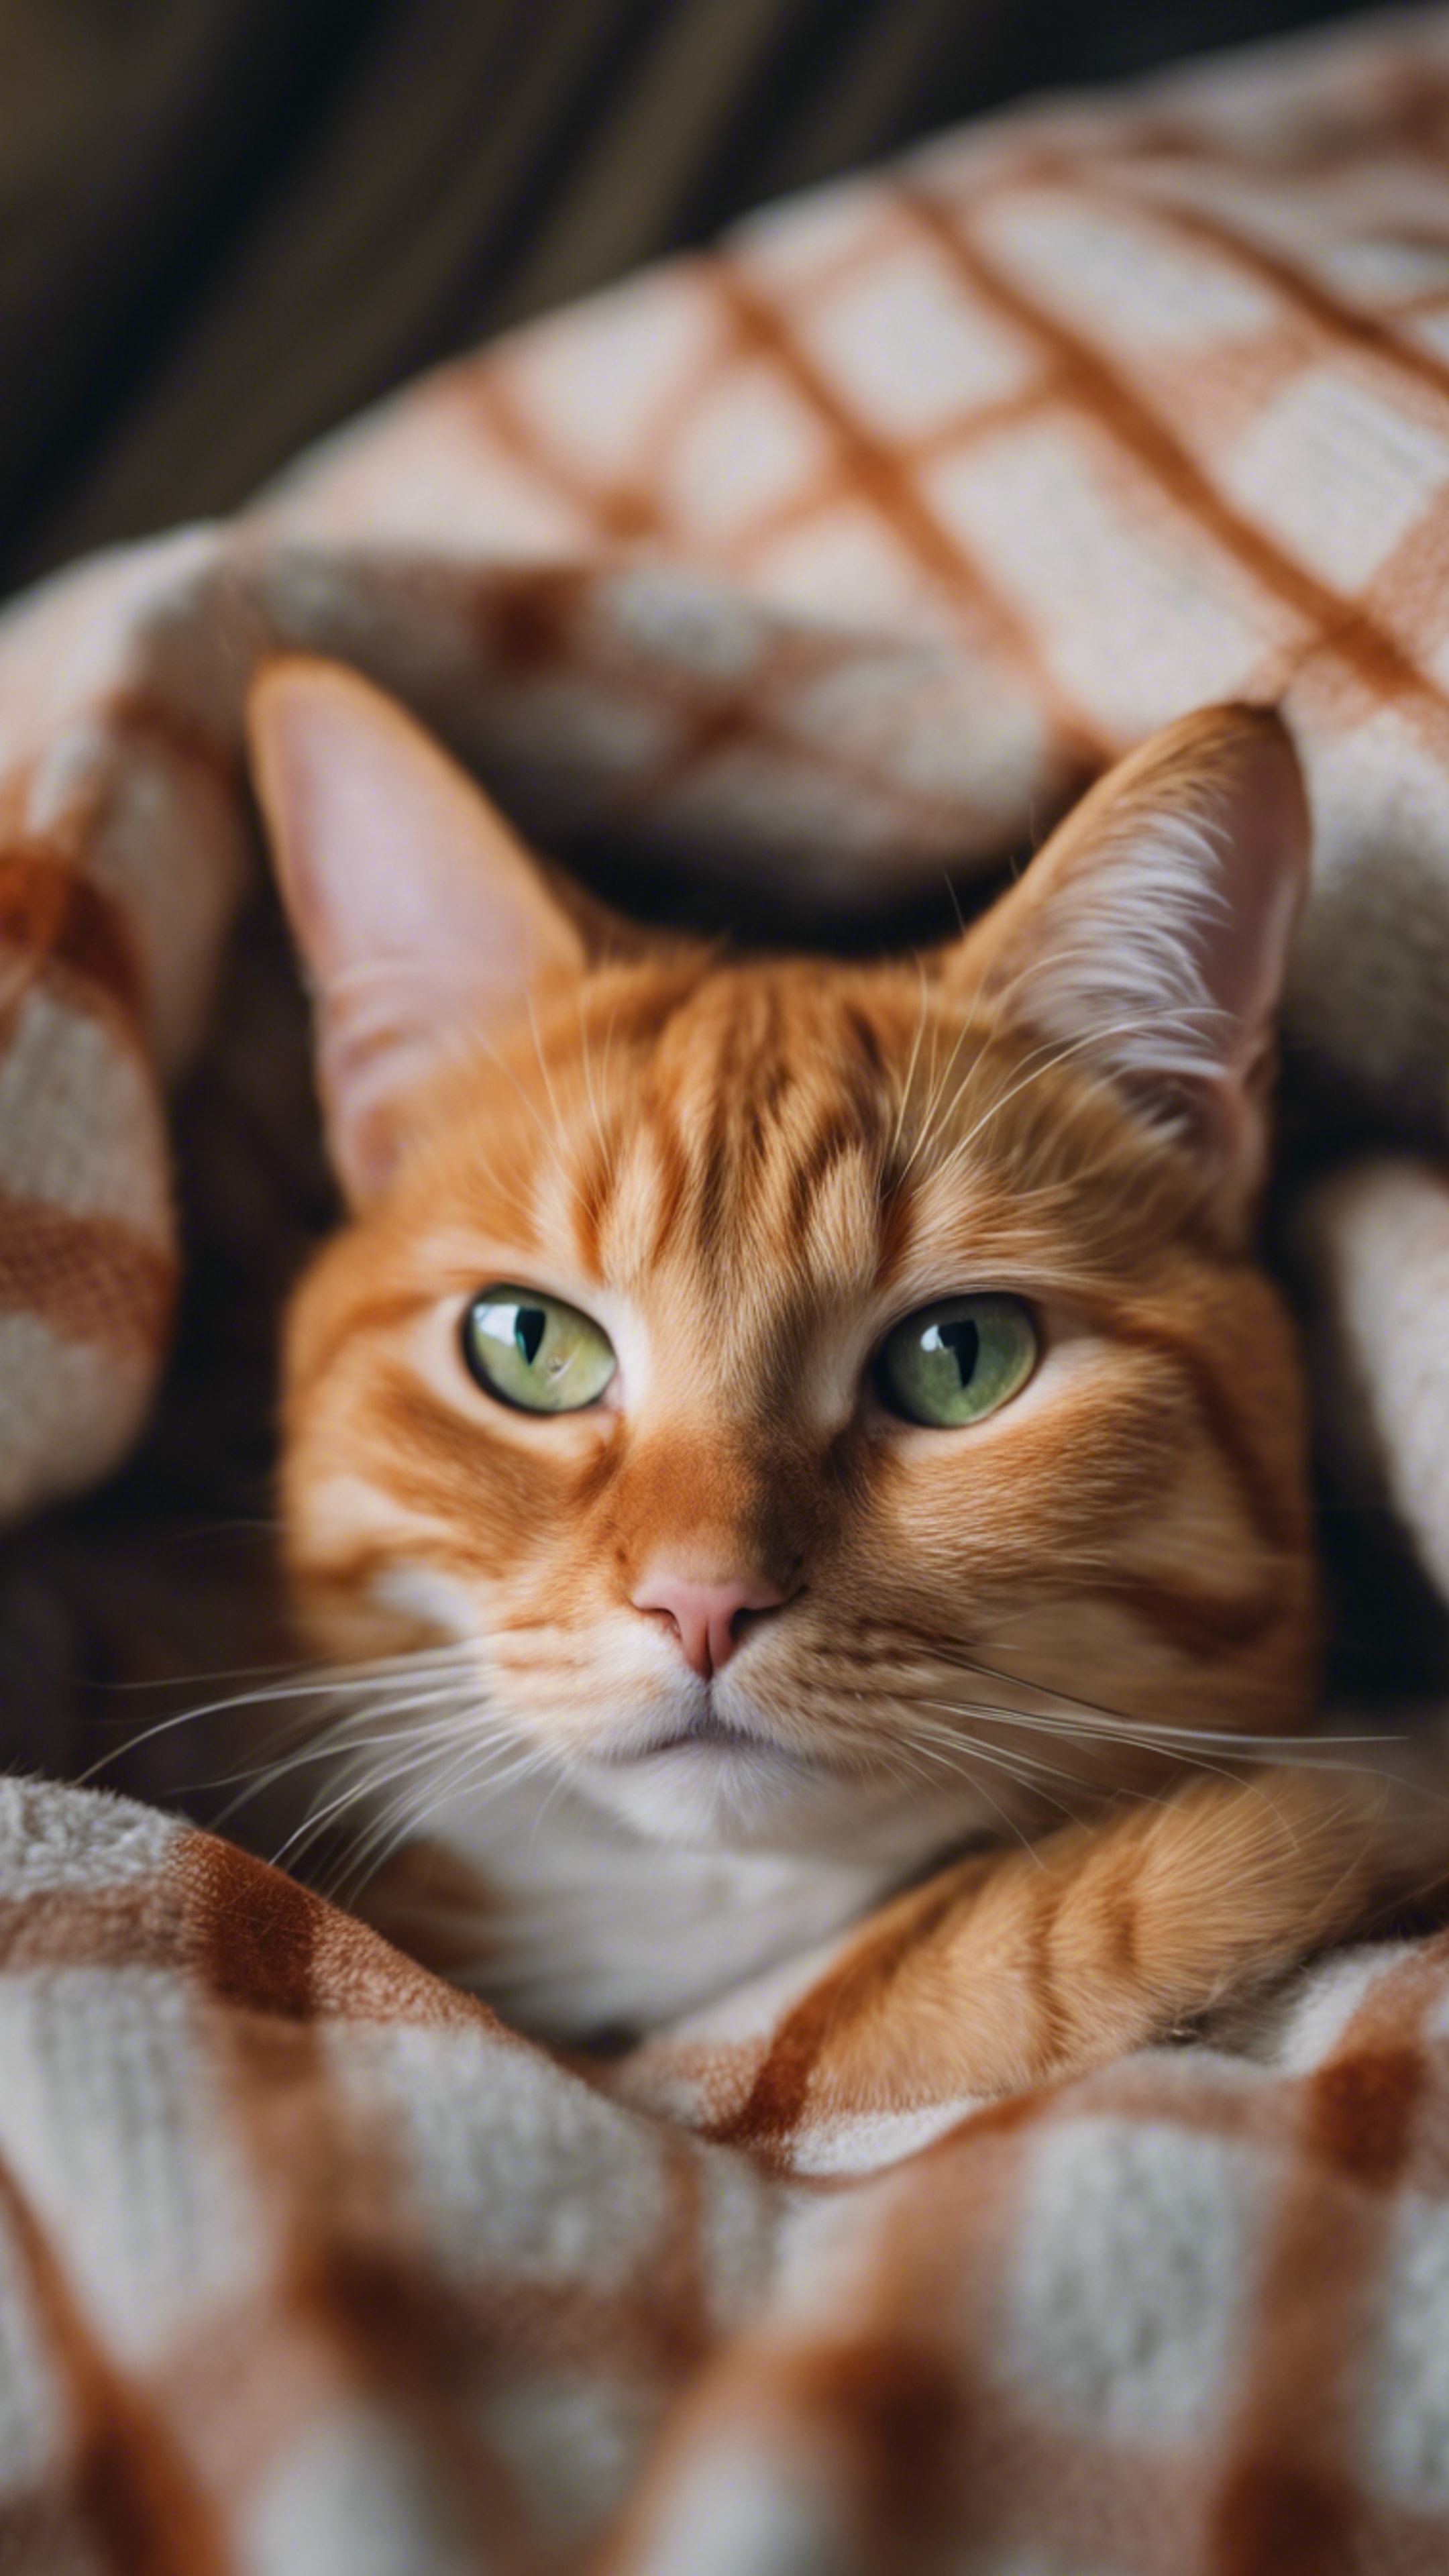 A close up of an orange tabby cat curled up on a cozy plaid blanket, purring gently, with a playful glint in its eyes.壁紙[45e4538616504ff6a891]